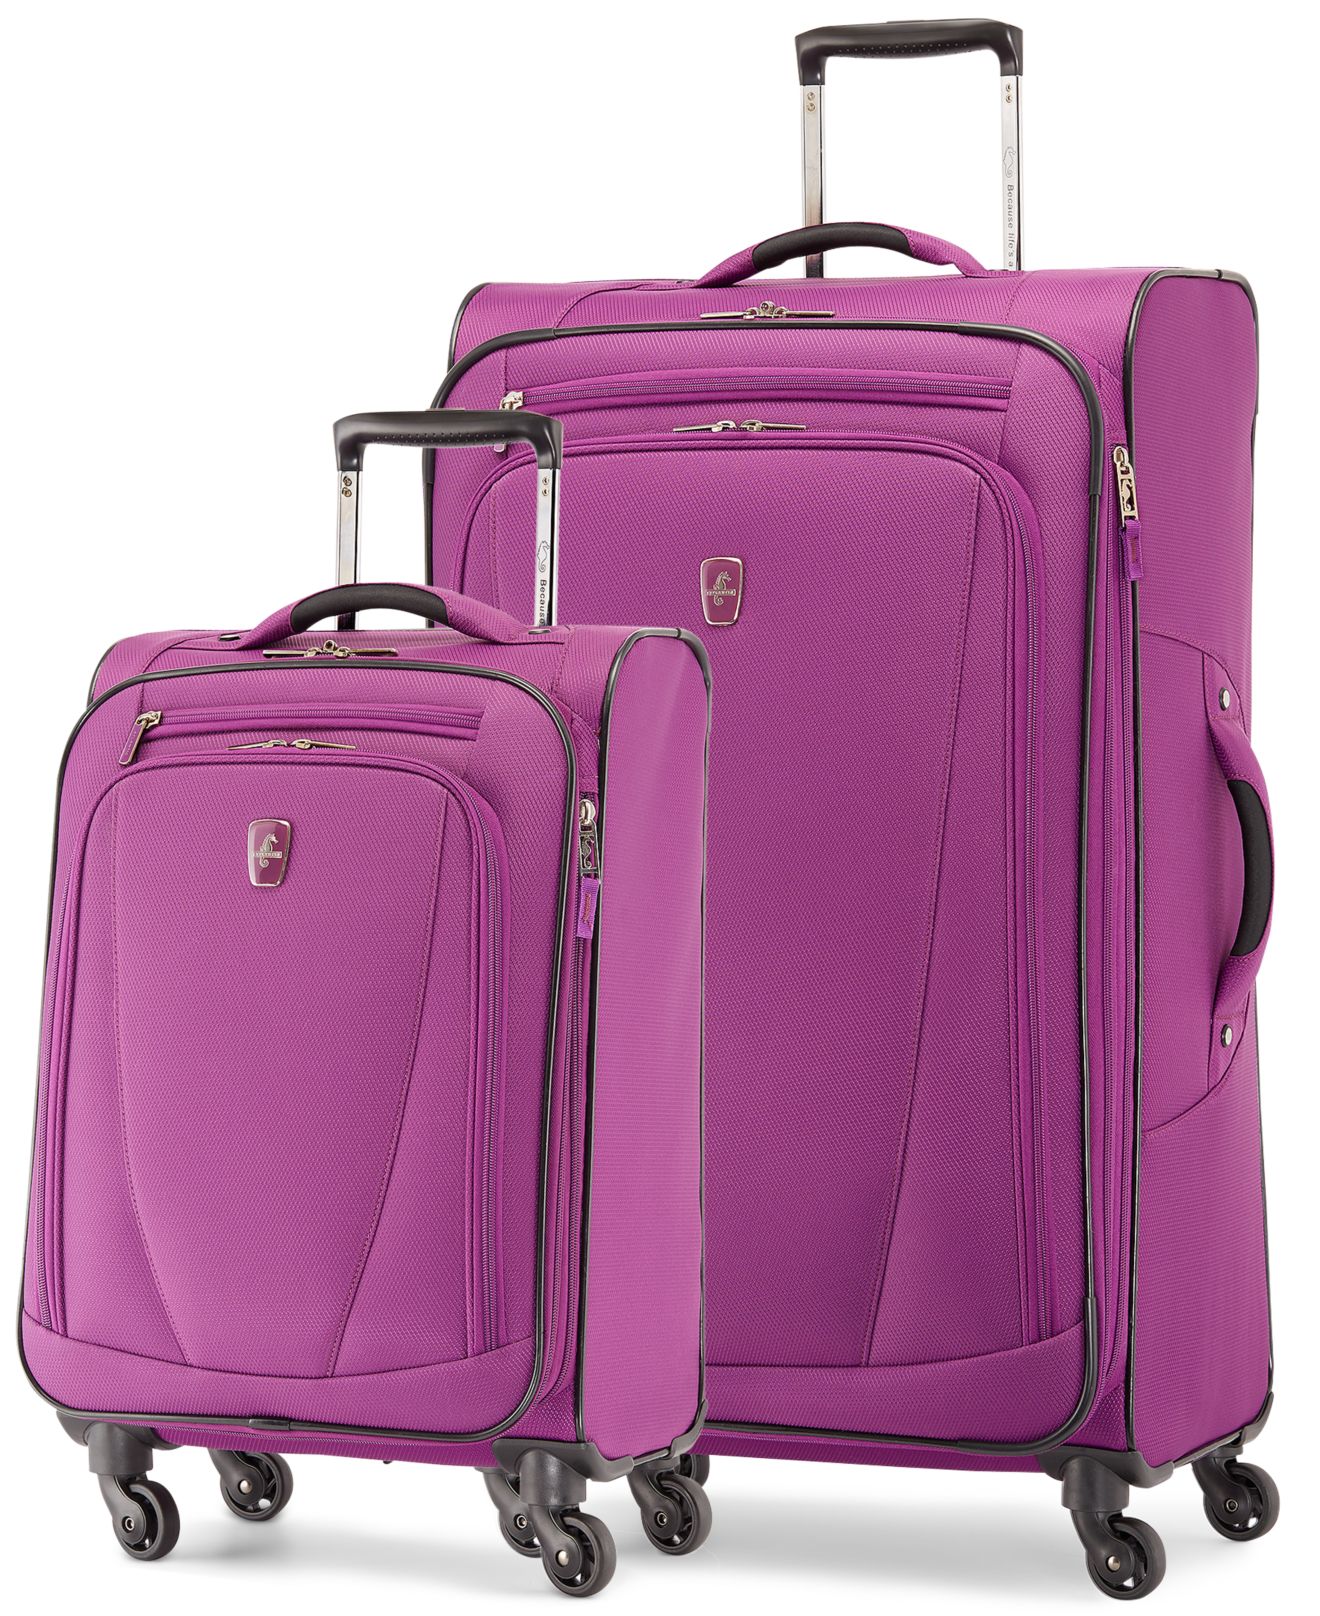 Pink Suitcases For Sale - Mc Luggage